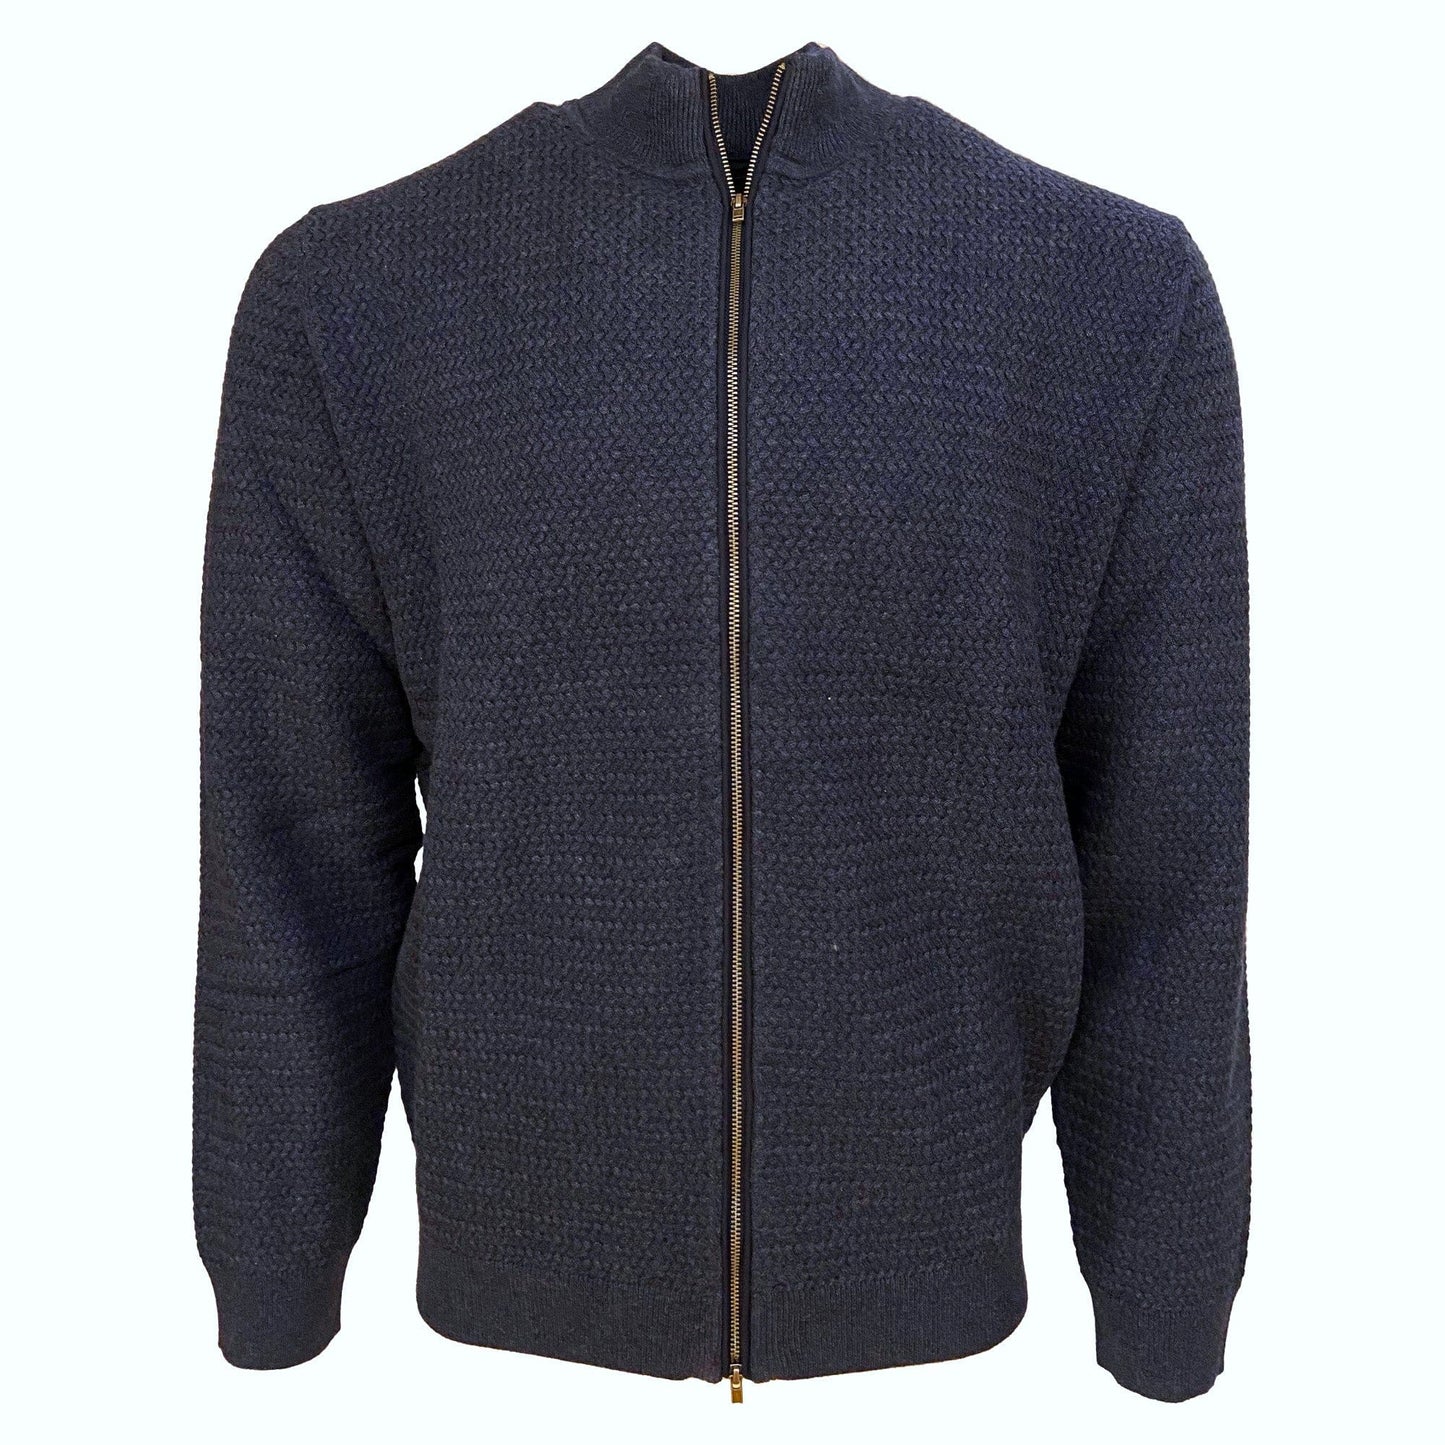 Leo Chevalier Design Stay Cozy and Stylish with a Blue Full Zip 100% Cotton Mock Neck Sweater